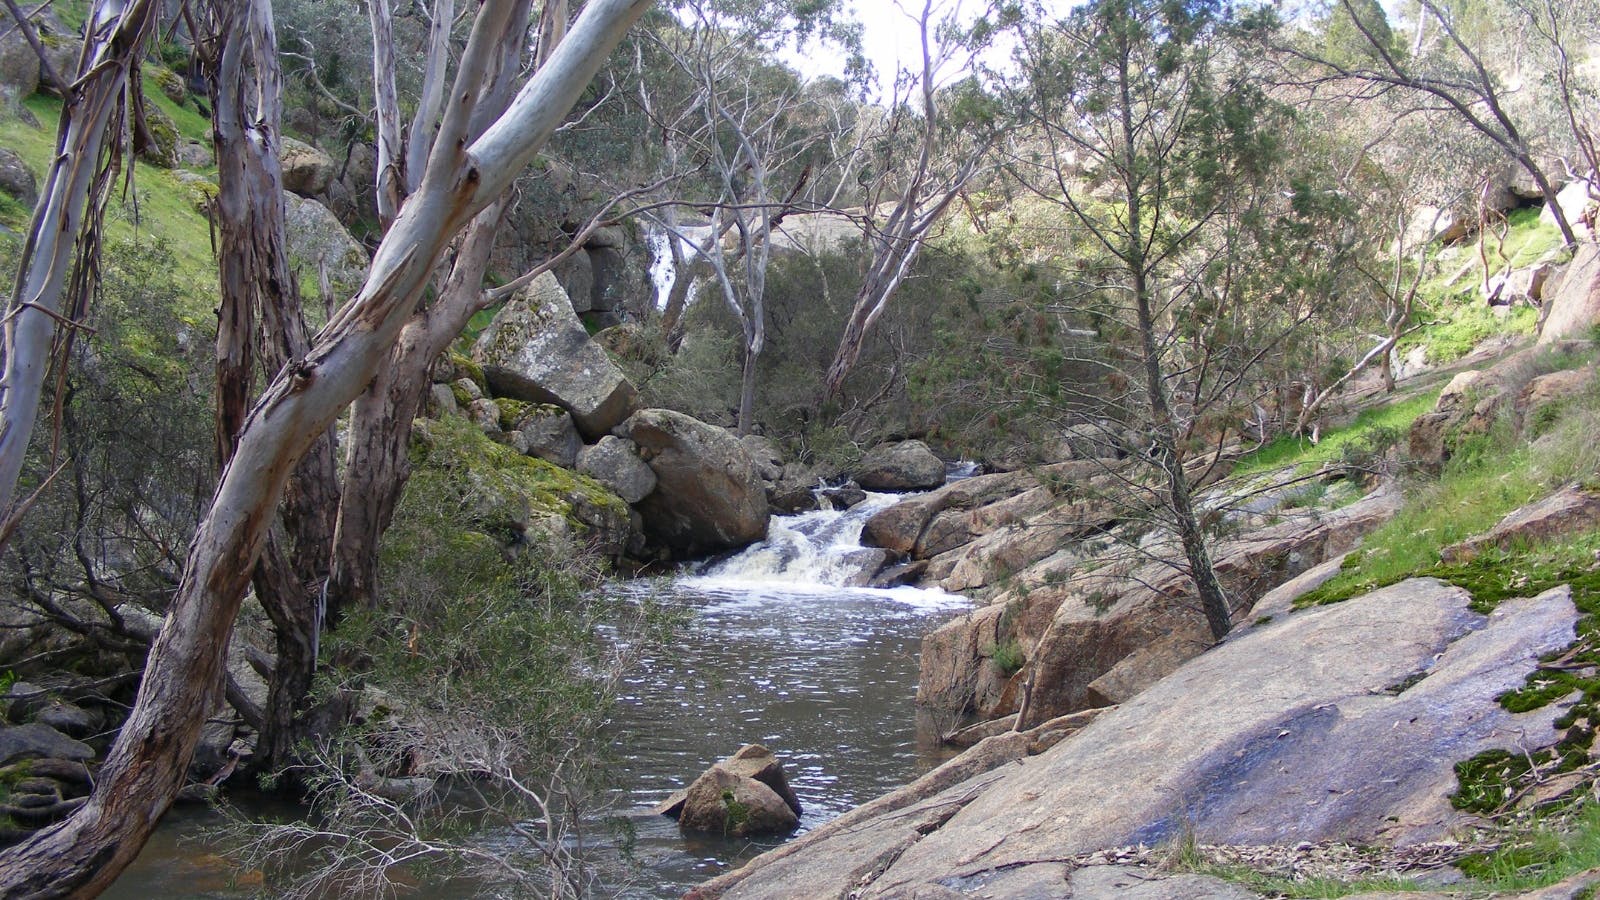 Flowing water in Reidy Creek over rocks, trees and sunny day.